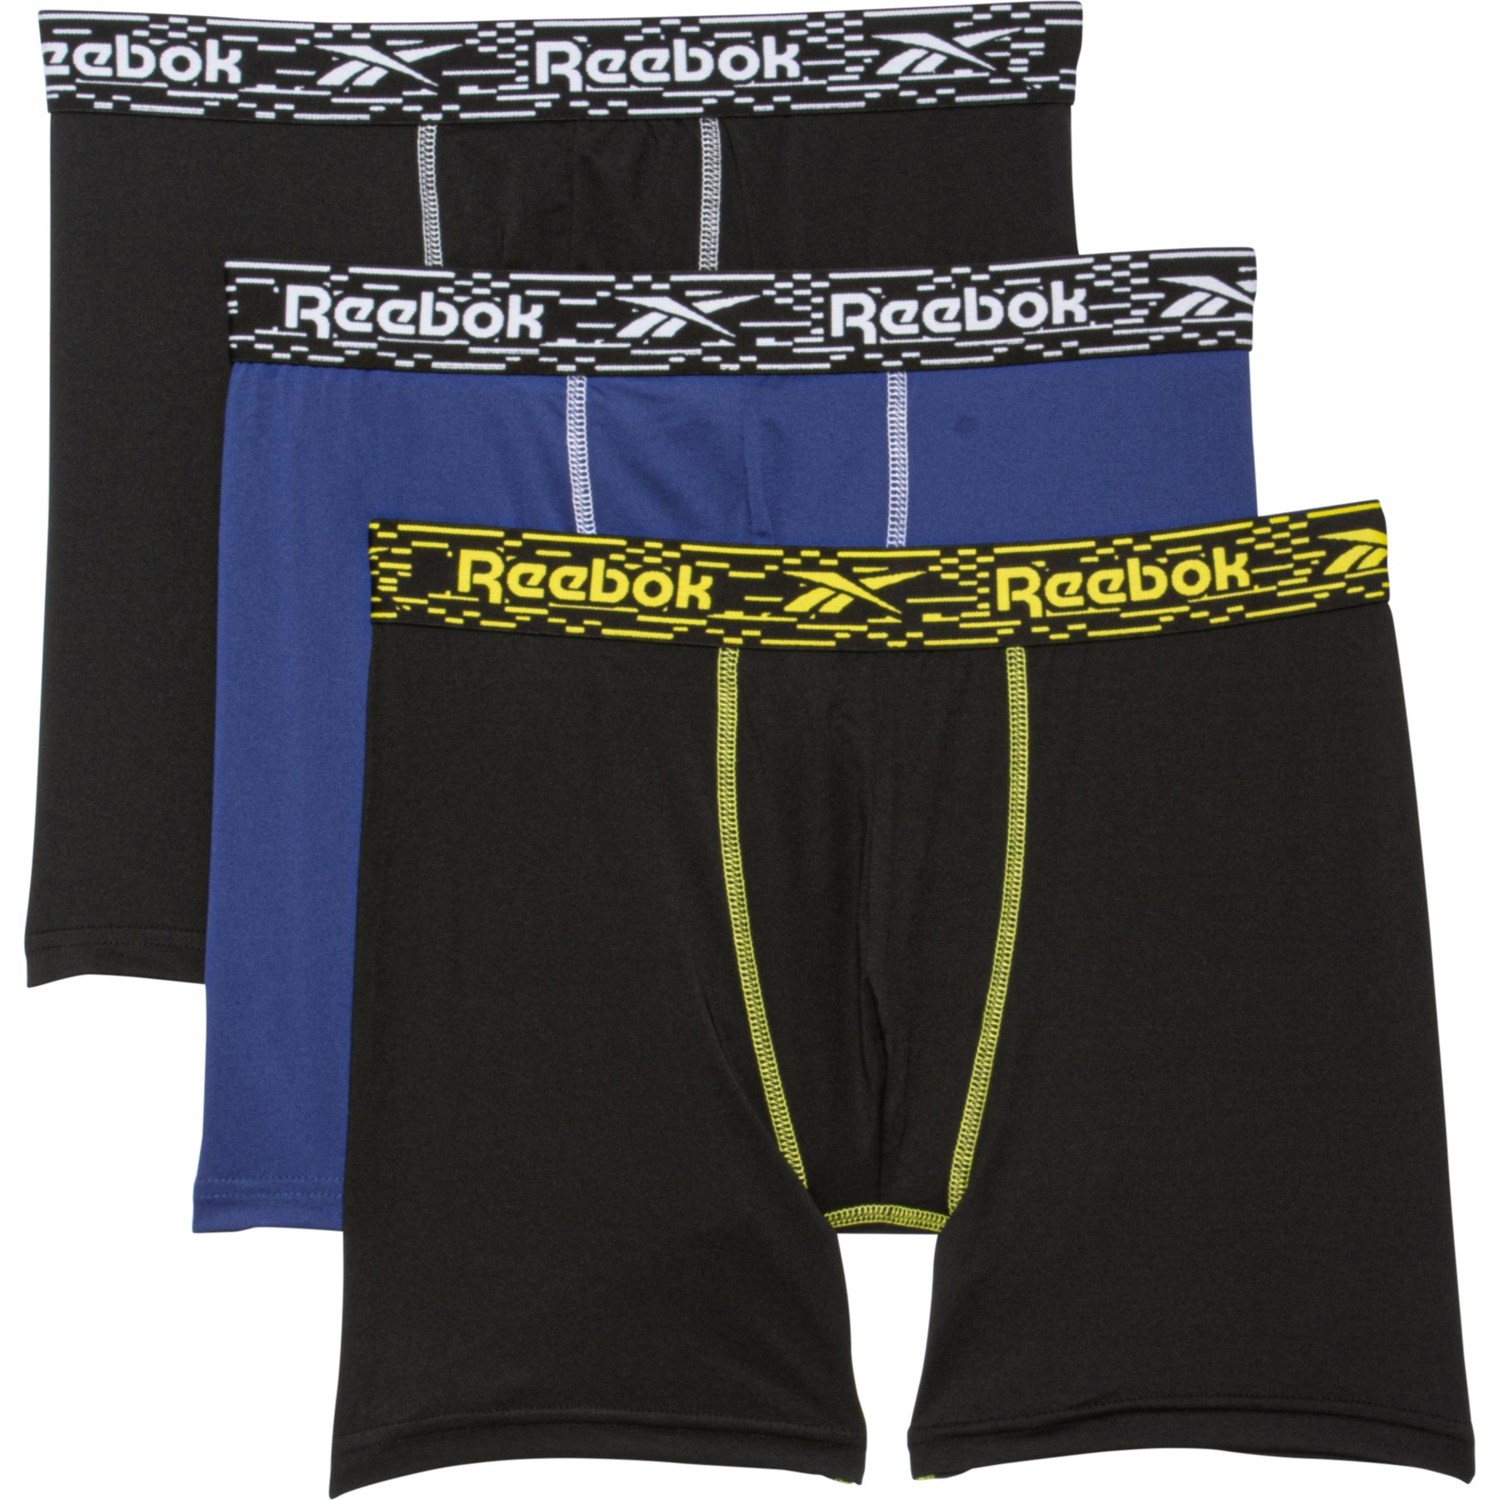 Reebok Stretch-Performance Antimicrobial Boxer Briefs - 3-Pack - Save 50%